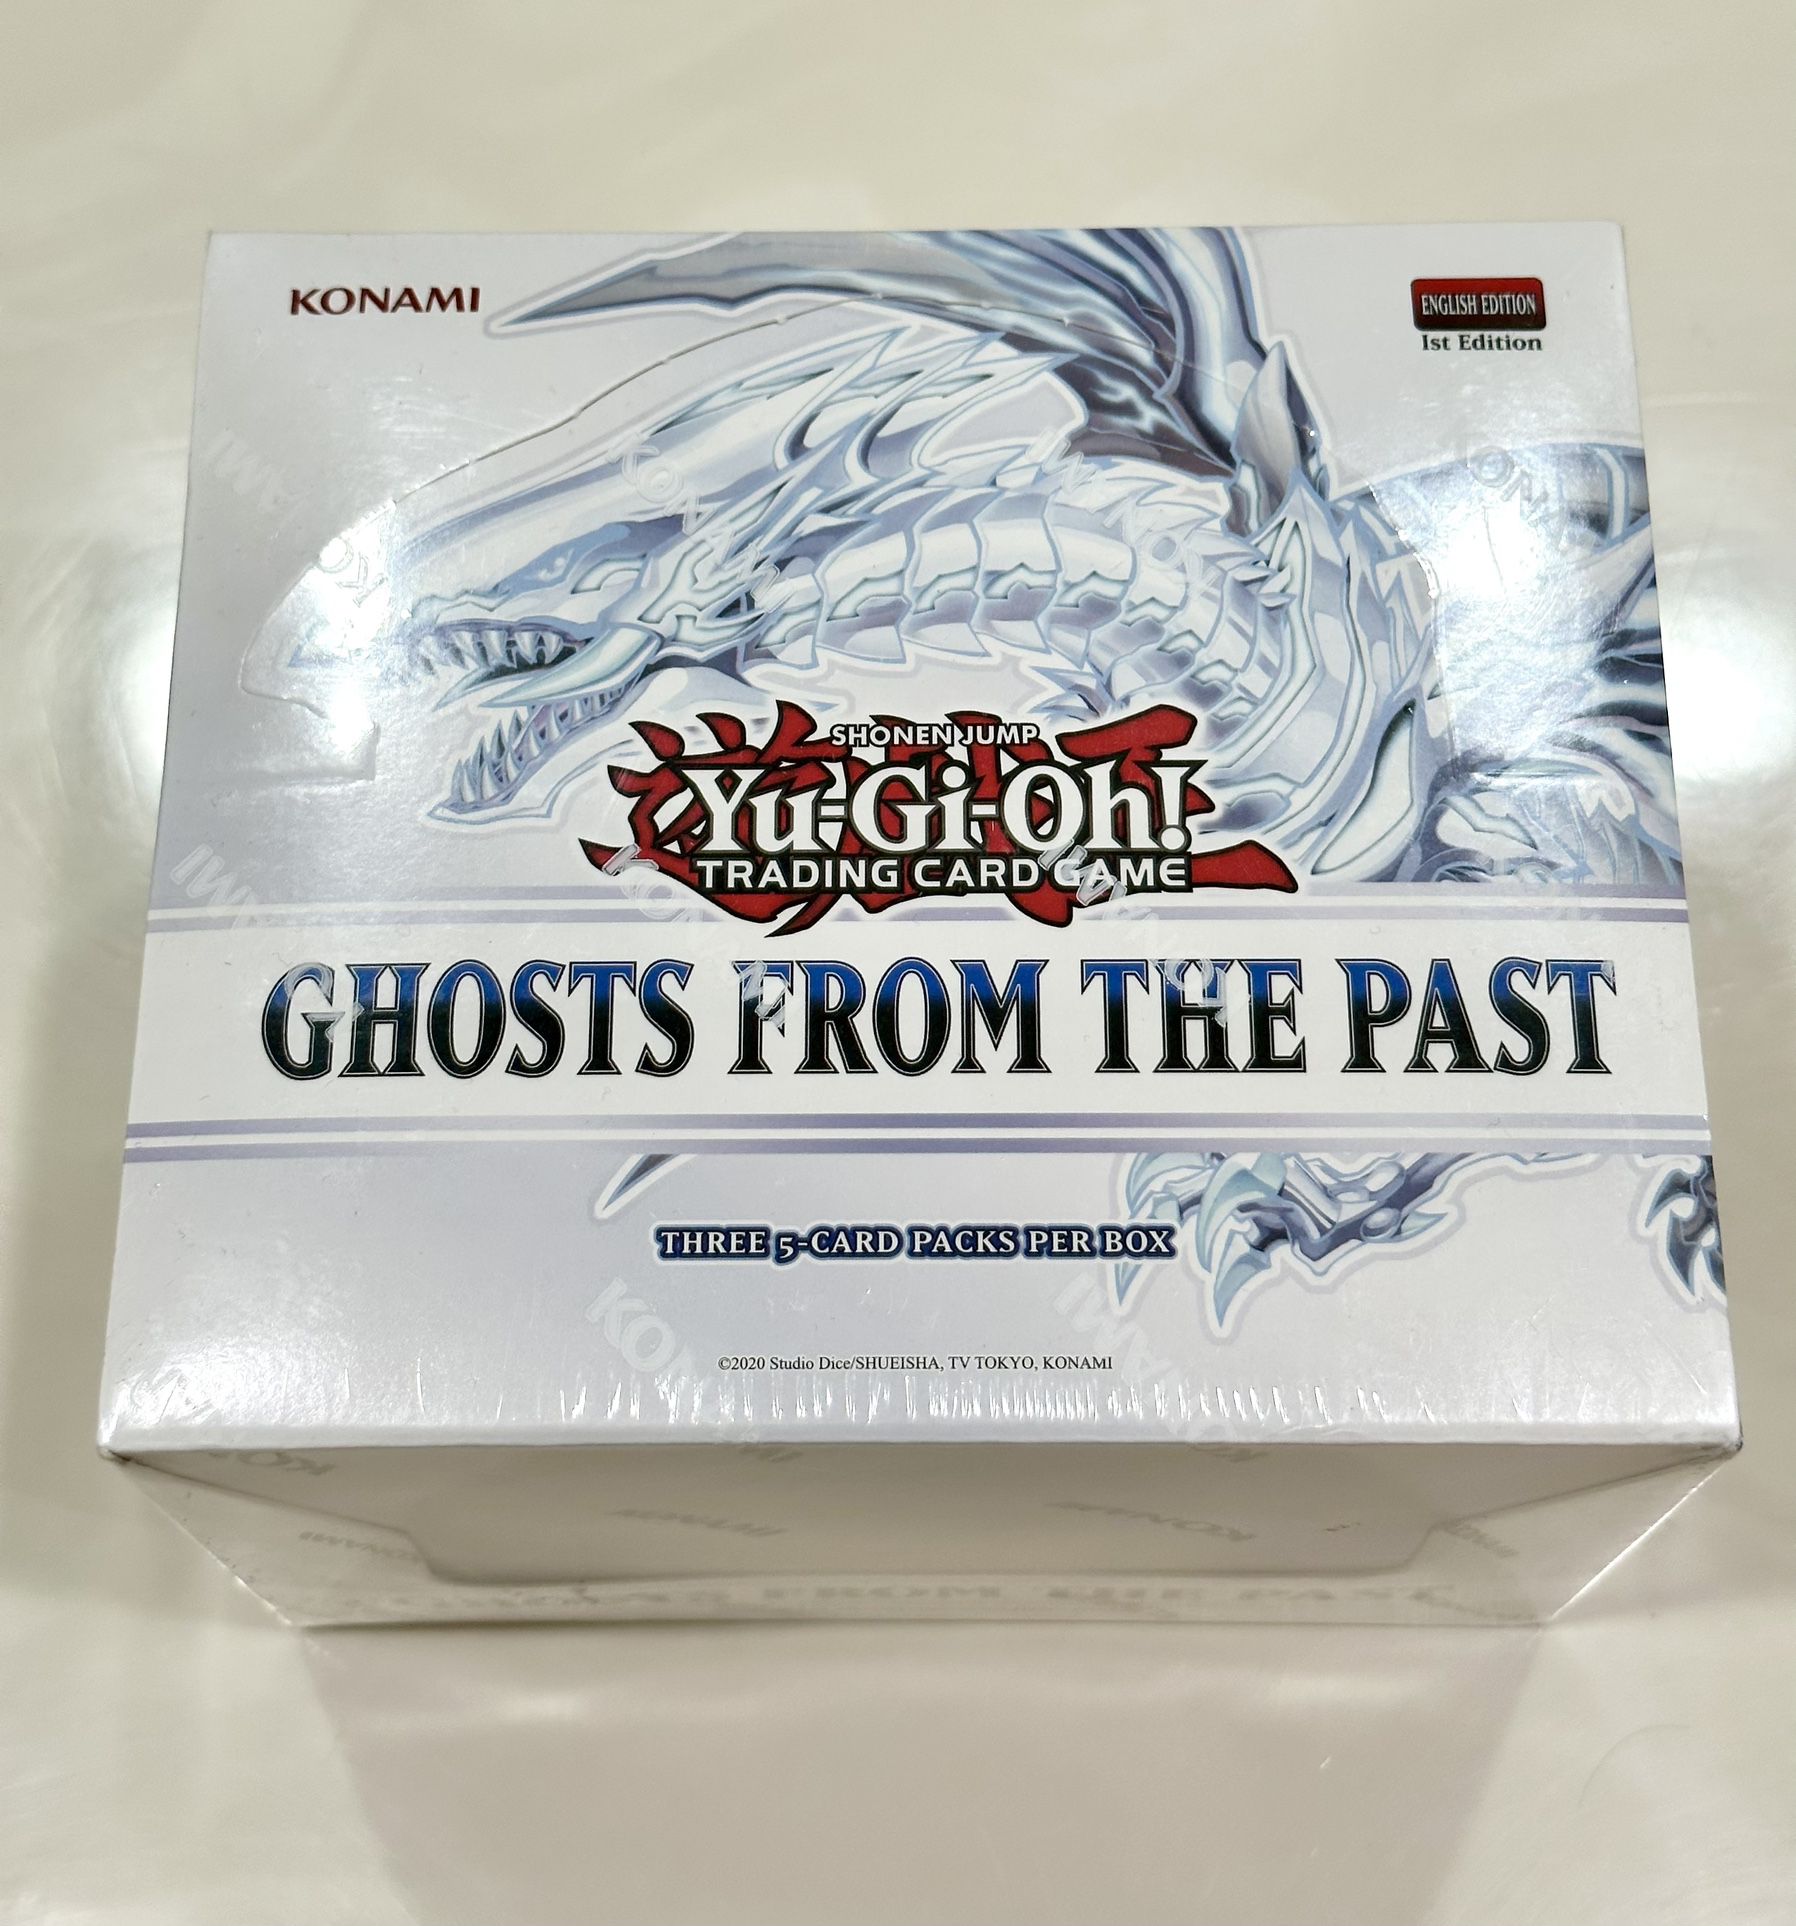 Yugioh Ghosts from the Past 1st Edition Box Display ( 5 Boxes ) Sealed Konami